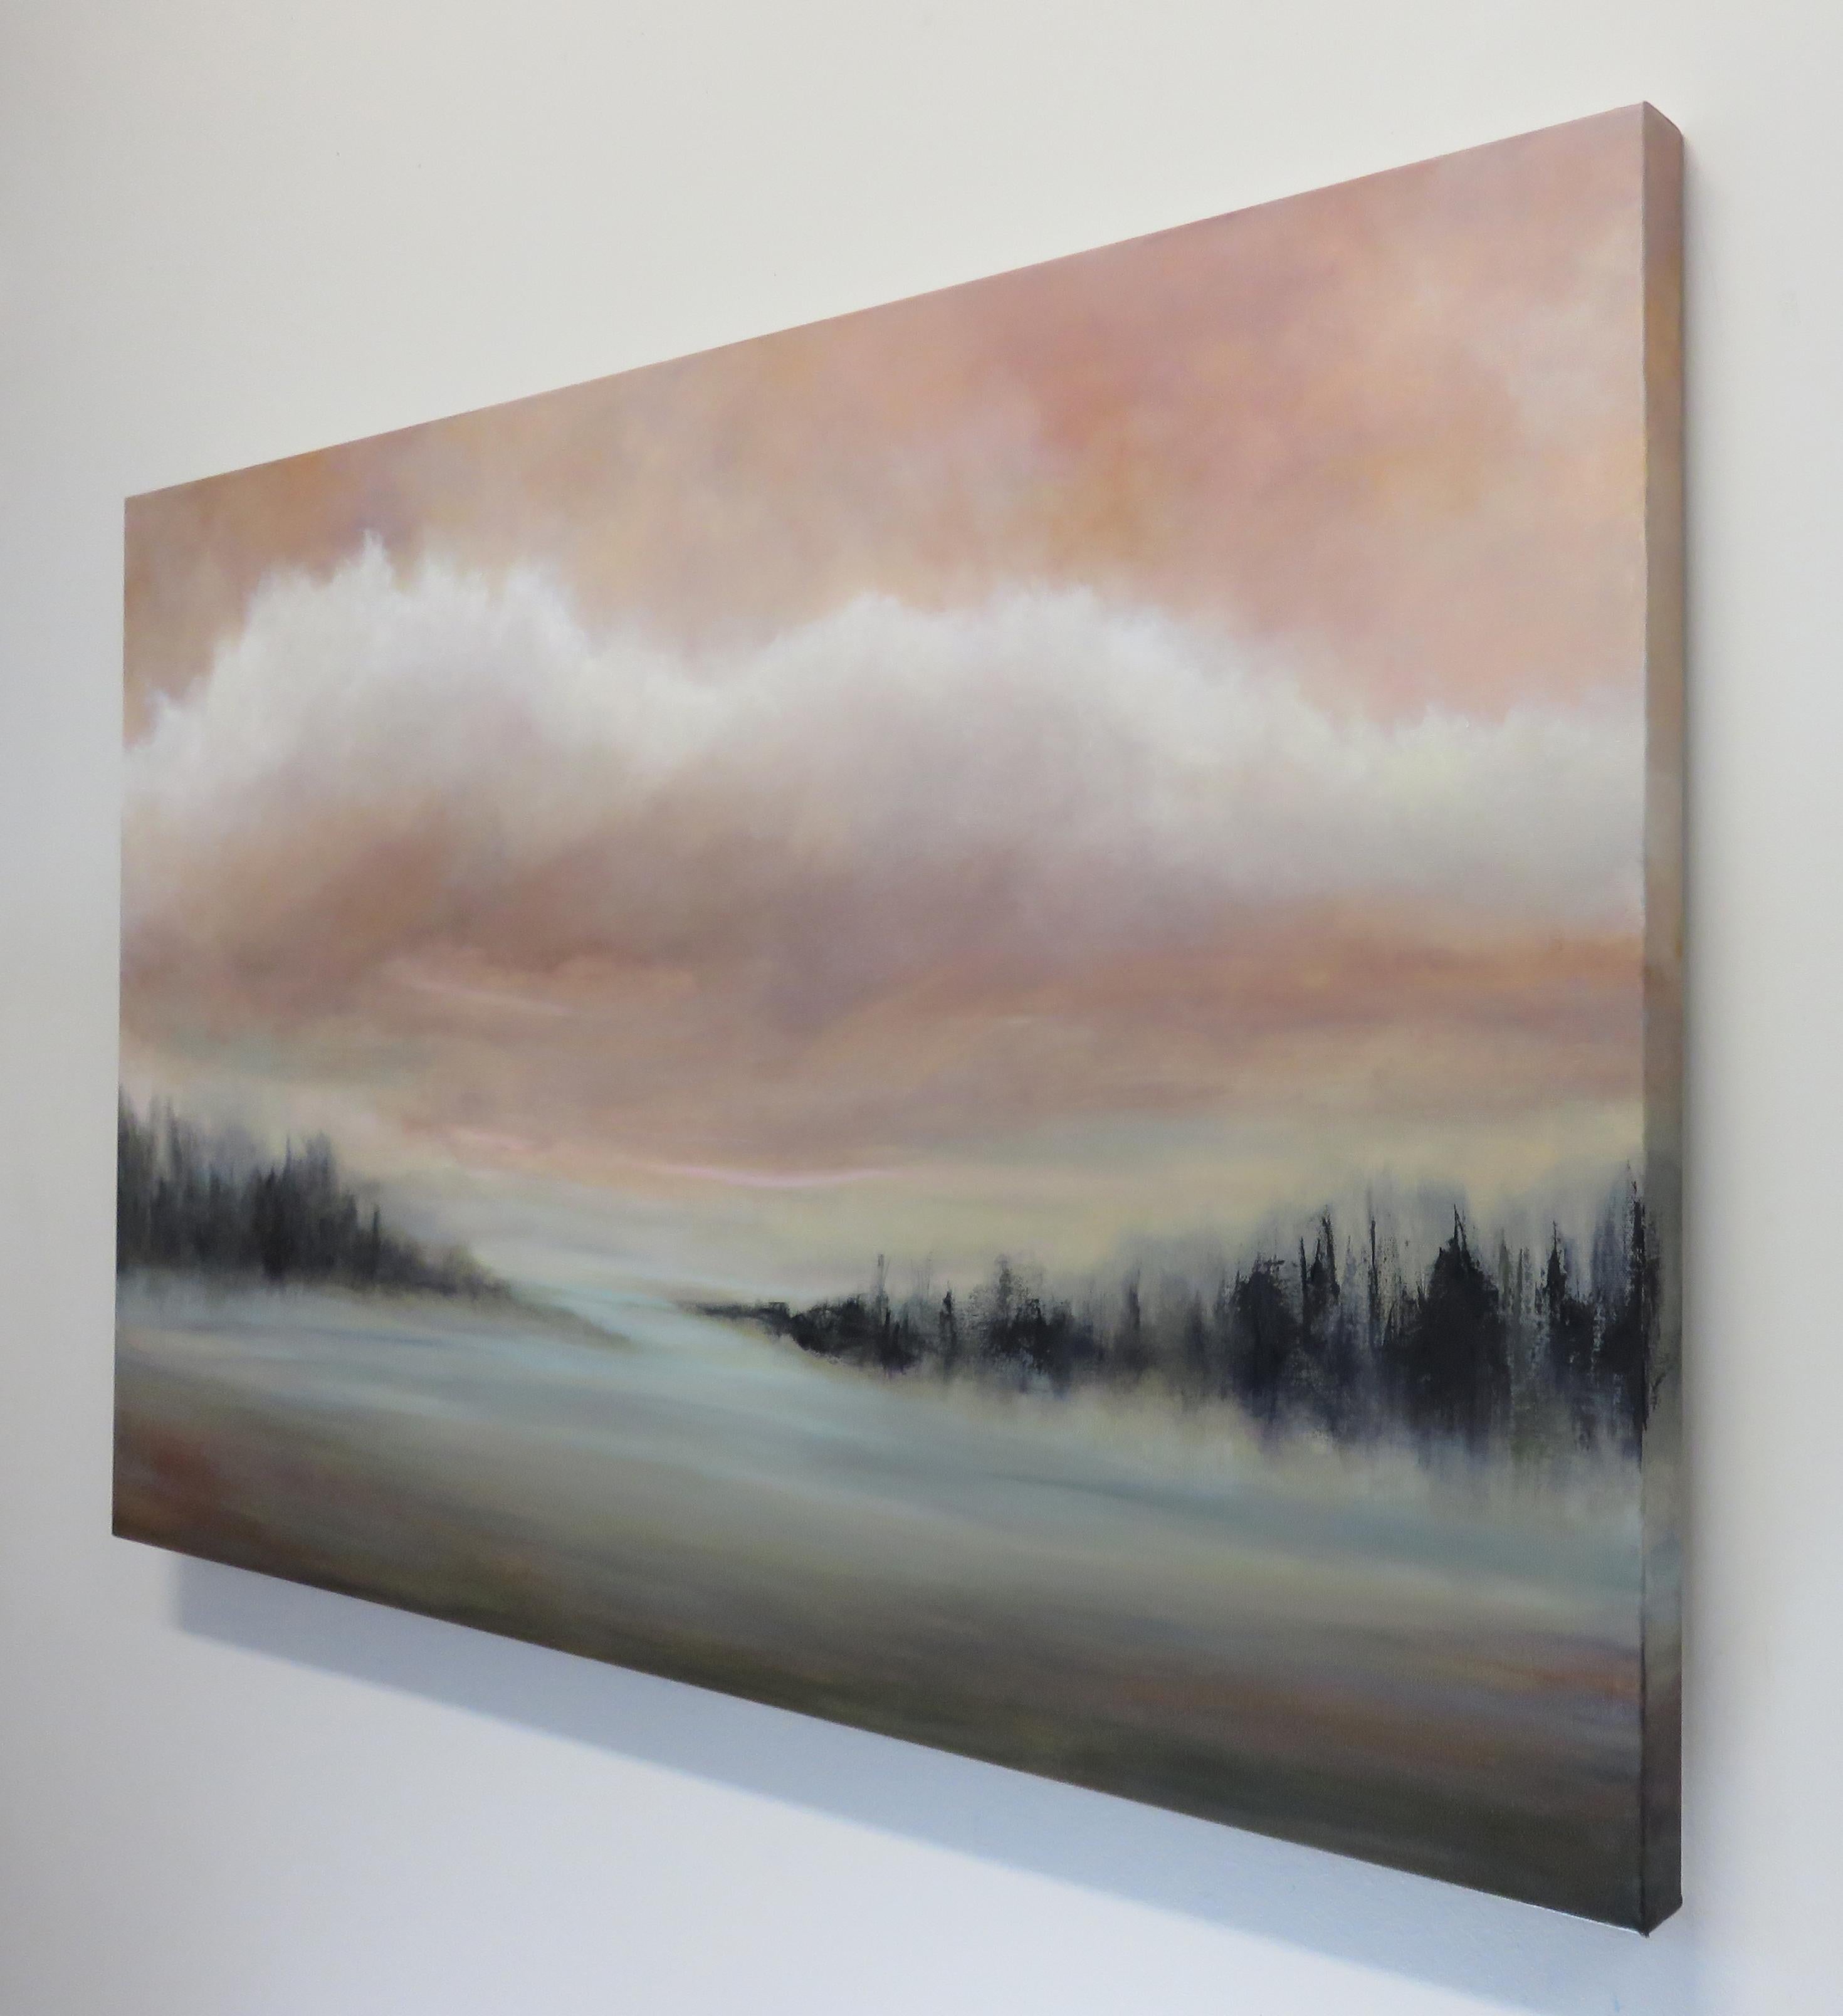 <p>Artist Comments<br>A dramatic view of a harbor stretches out into a soft abstractual landscape formation. Living in the Fraser Valley, artist Jenn Williamson looks forward to the wondrous sight this painting evokes memories of. She reimagines the